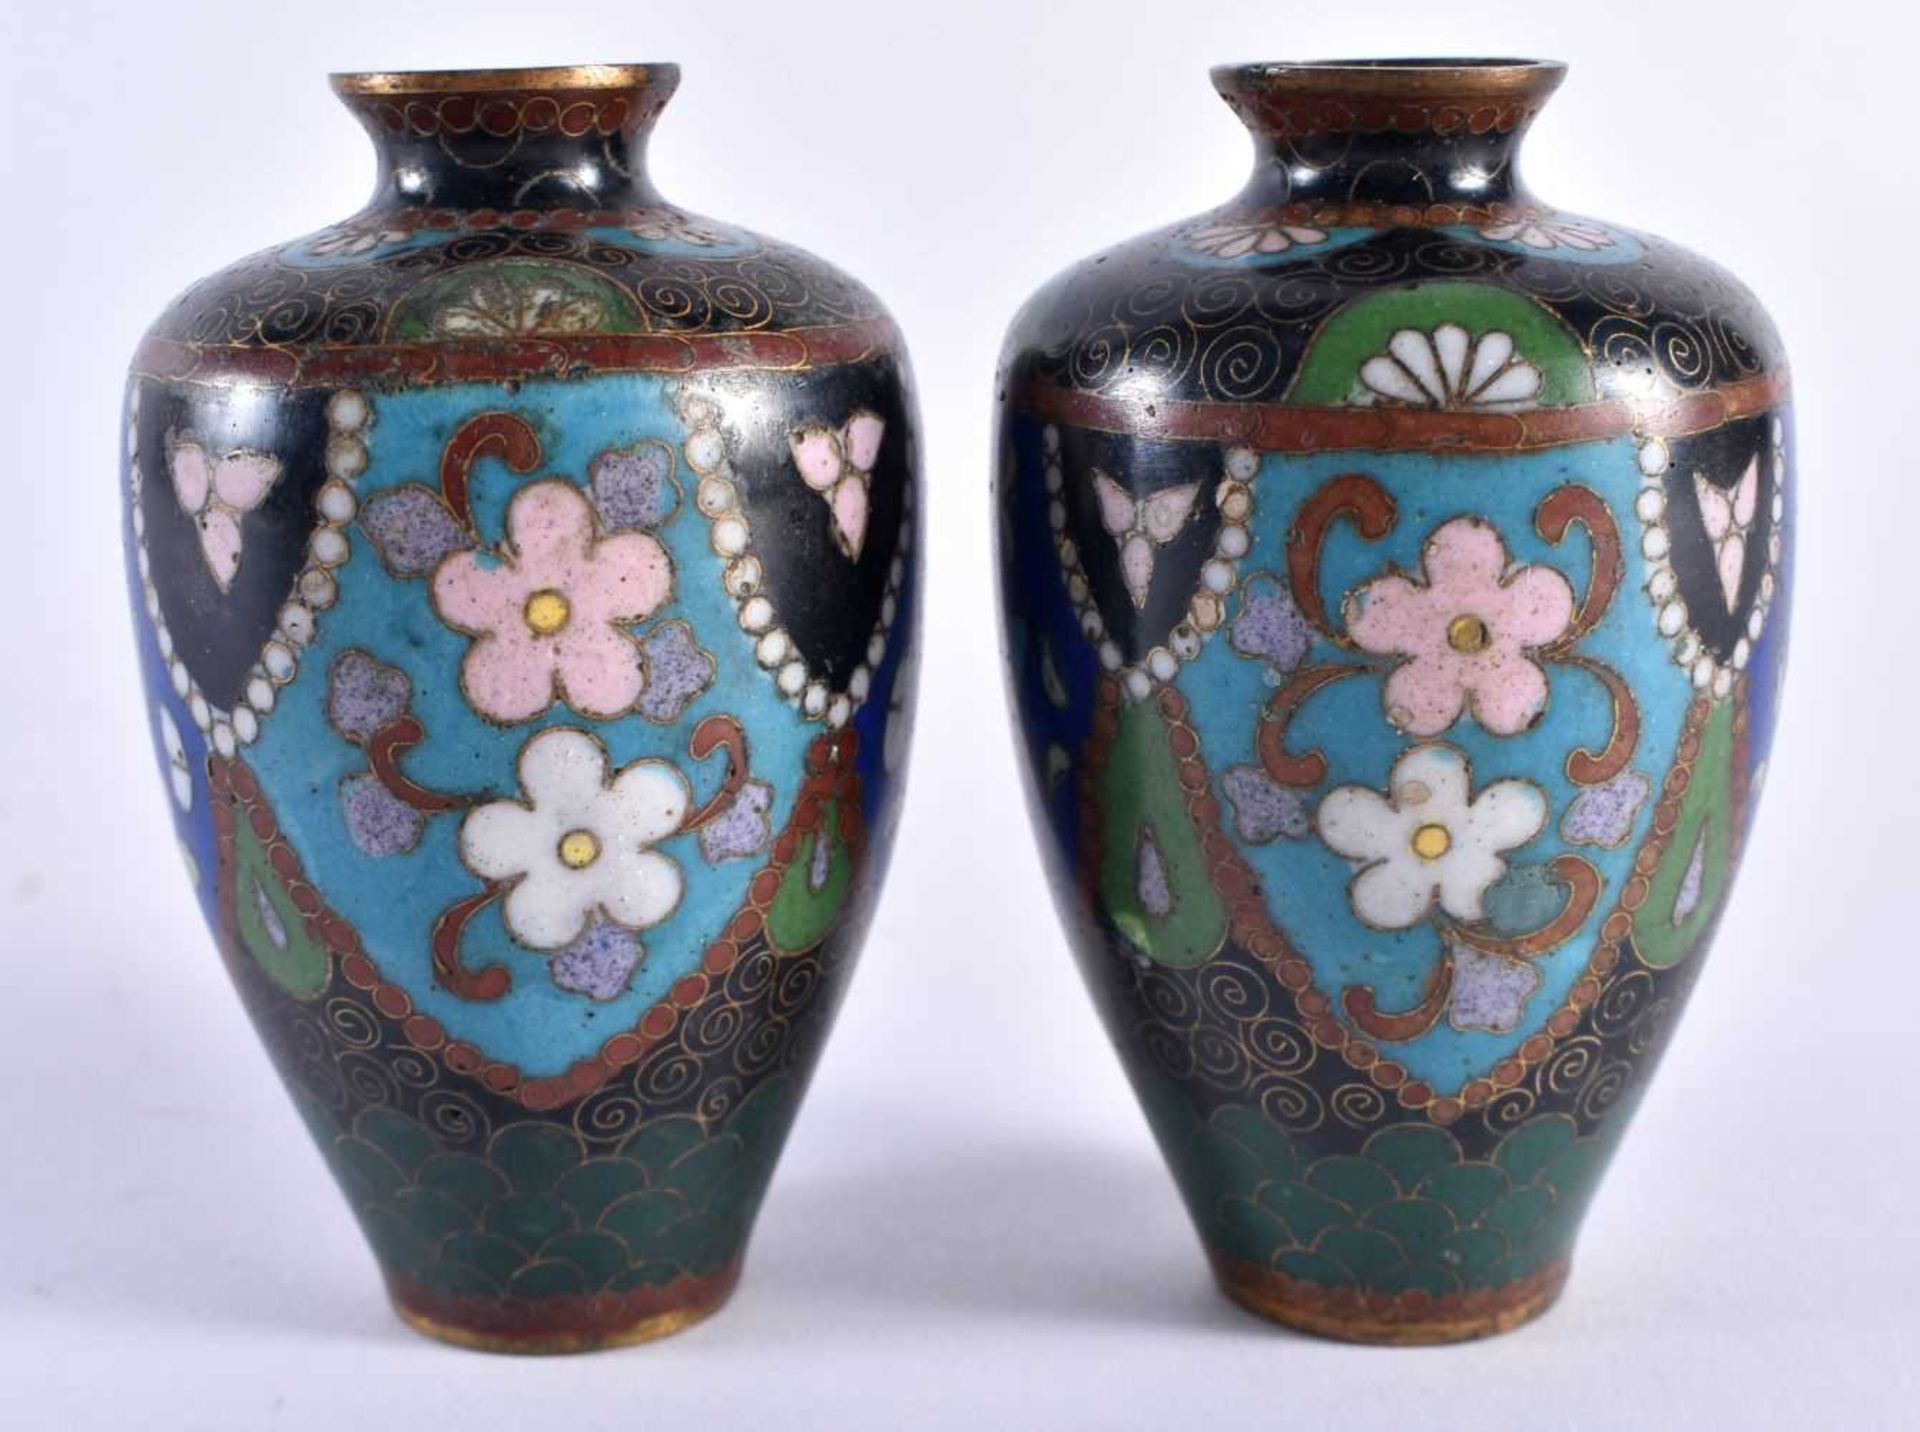 A MINIATURE PAIR OF LATE 19TH CENTURY JAPANESE MEIJI PERIOD CLOISONNE ENAMEL VASES decorated with - Image 2 of 5